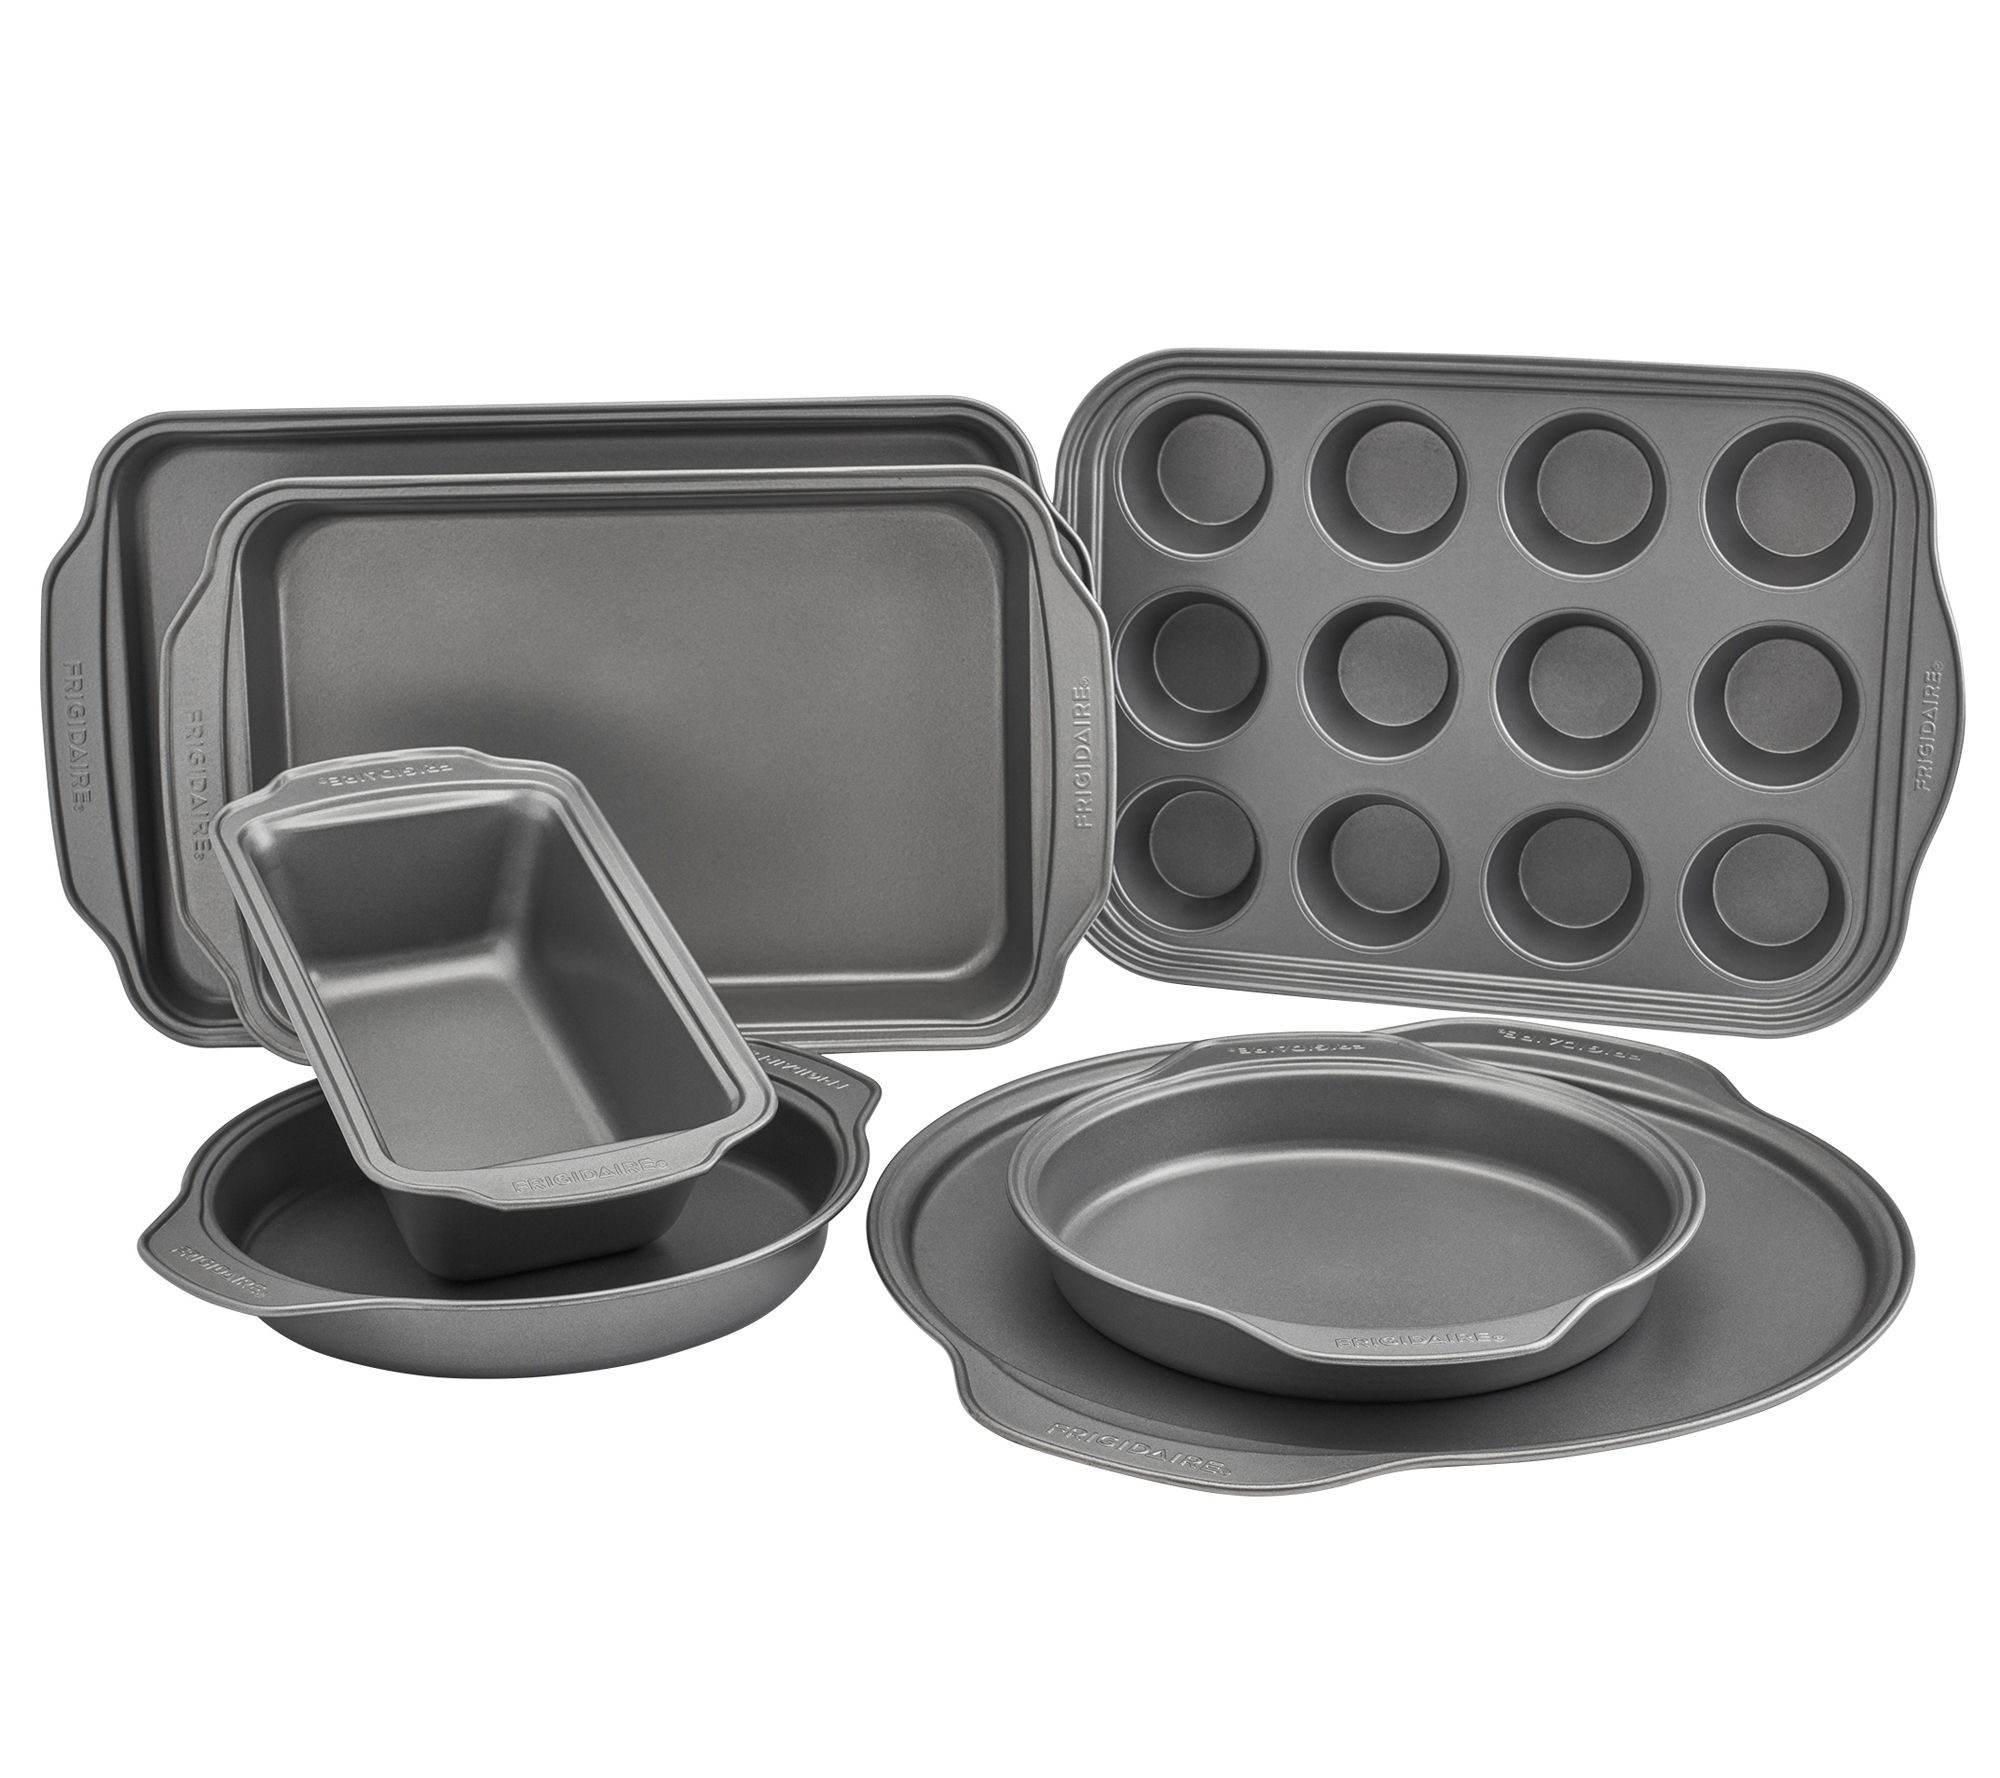 Oster 6 Piece Carbon Steel Non Stick Bakeware Set In Greystone